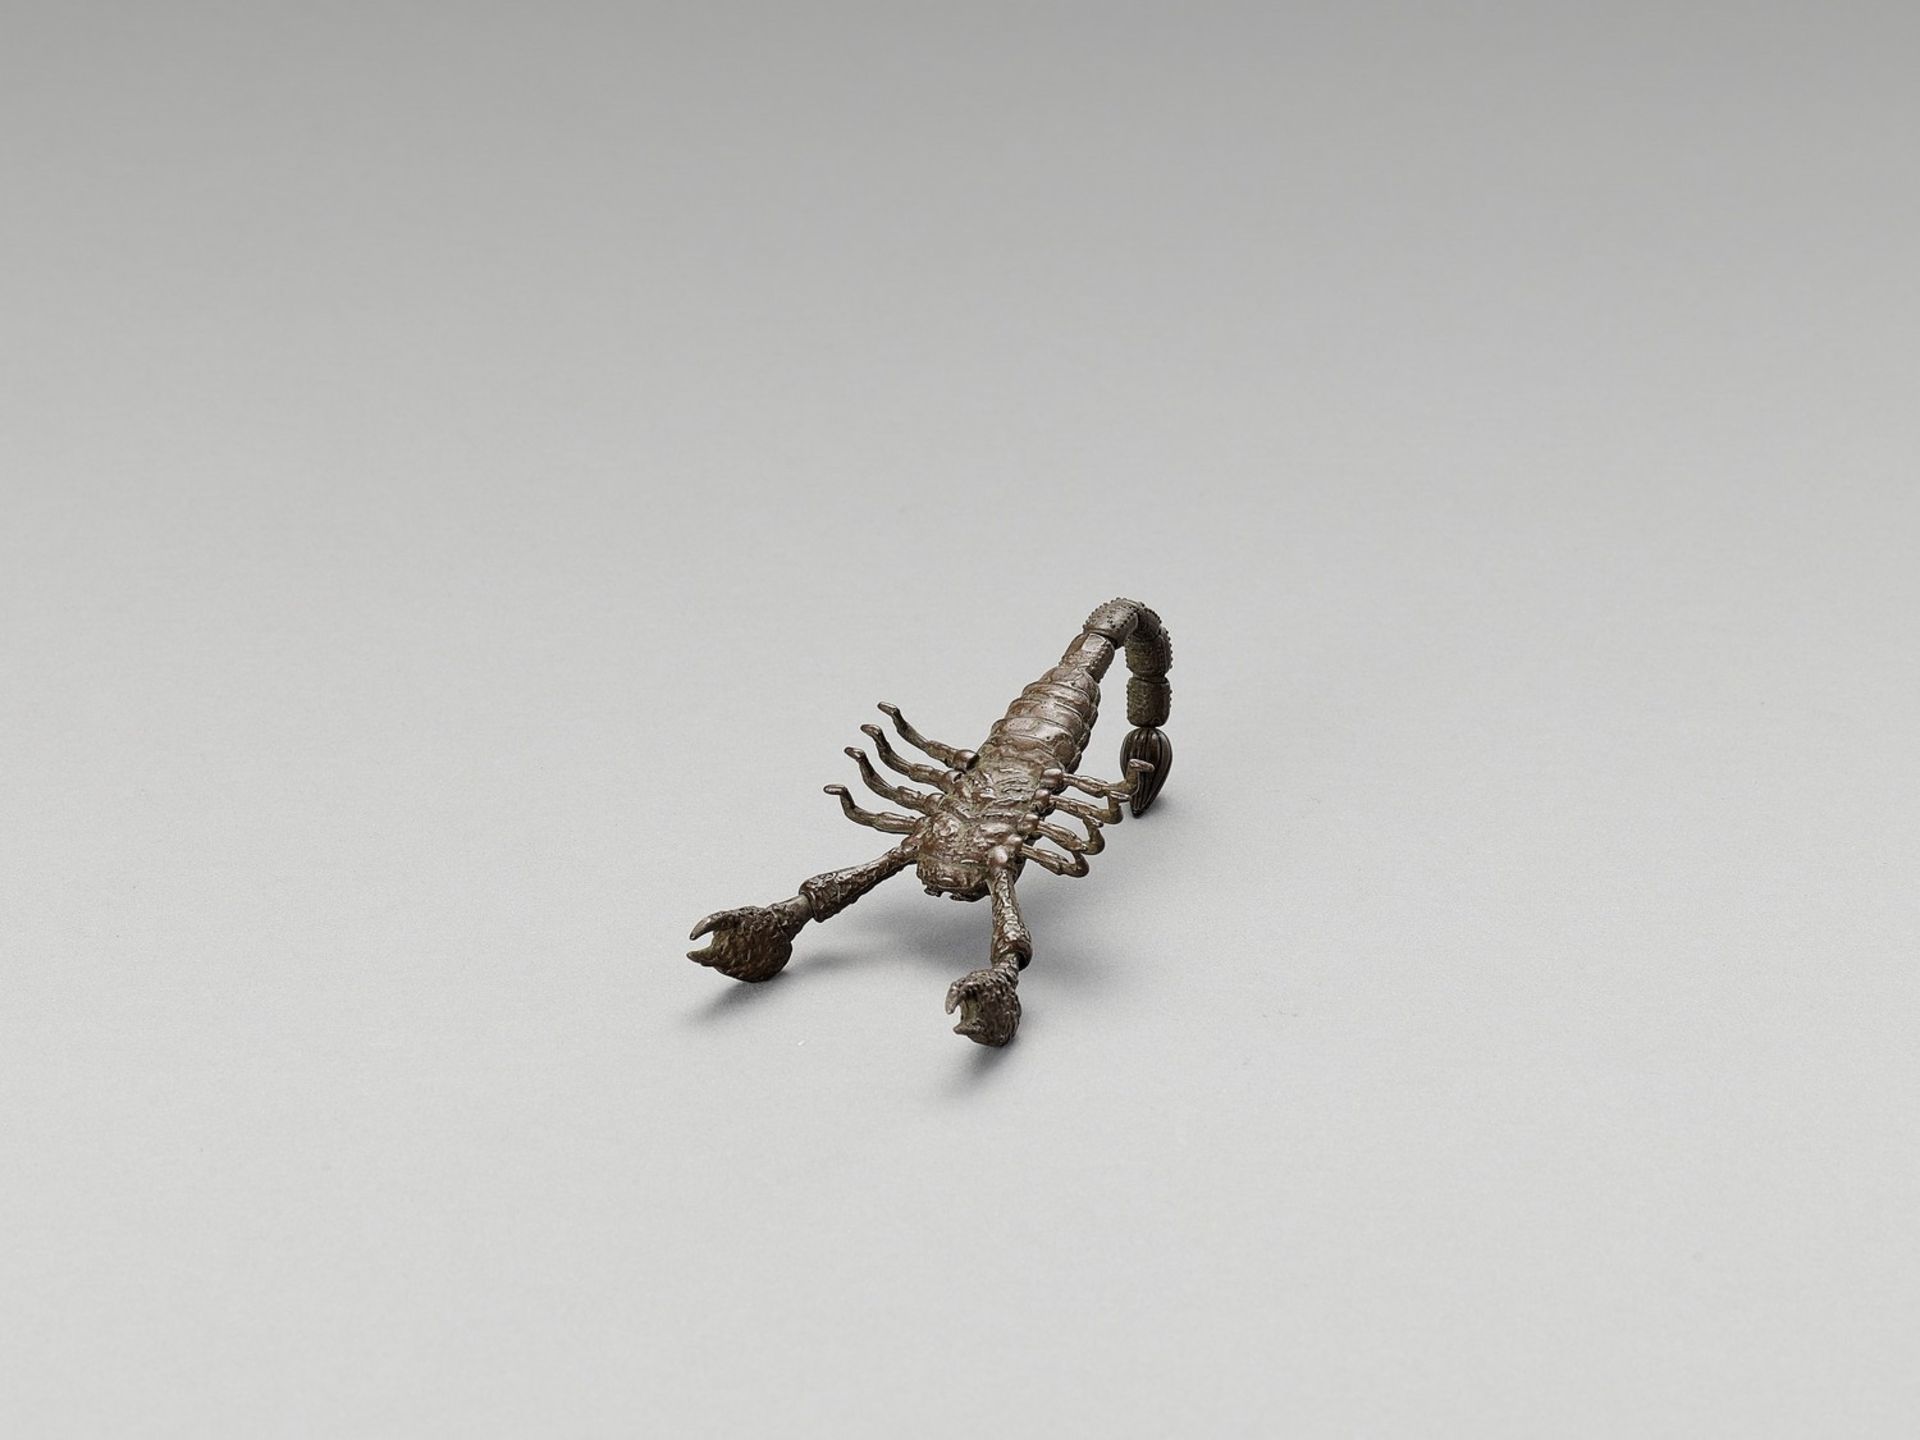 AN ARTICULATED BRONZE OKIMONO OF A SCORPION - Image 4 of 4